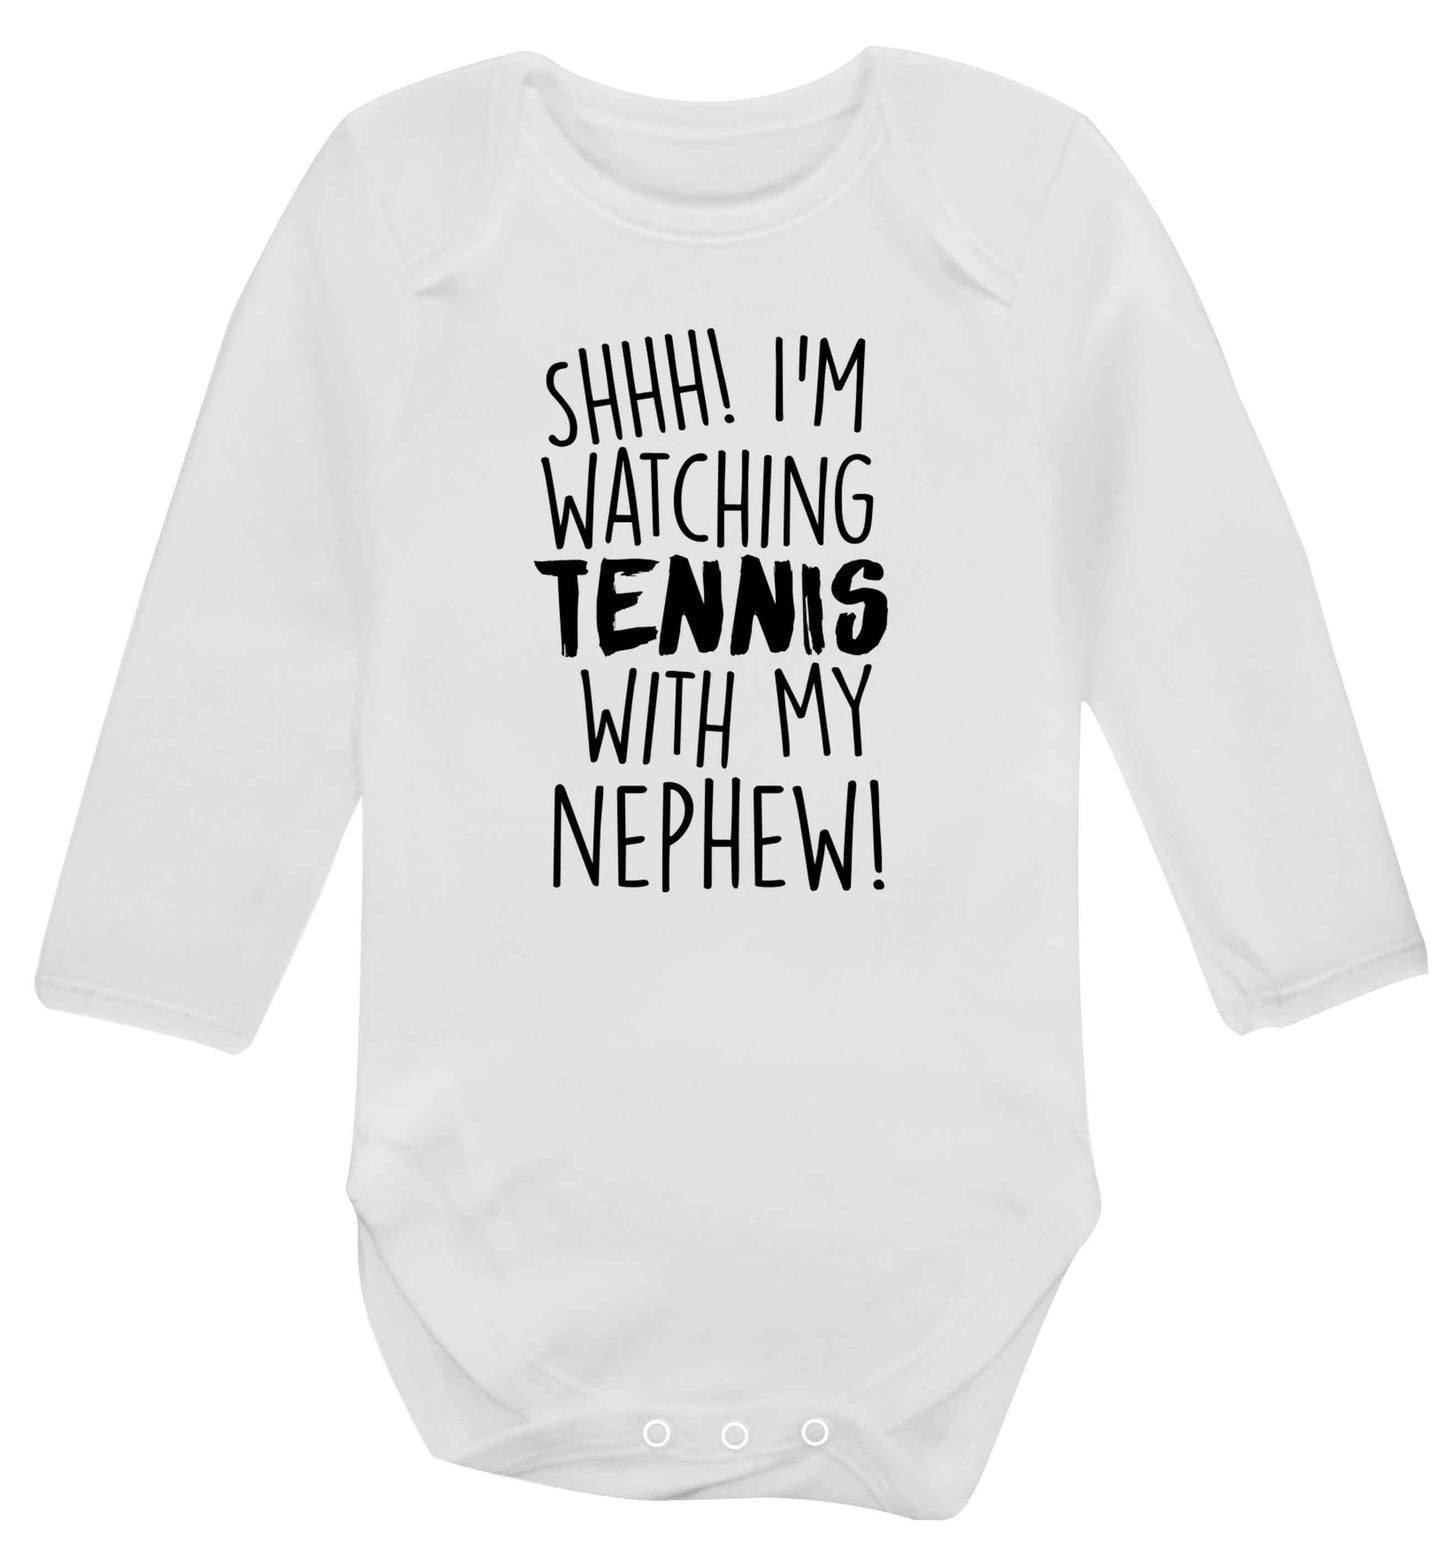 Shh! I'm watching tennis with my nephew! Baby Vest long sleeved white 6-12 months